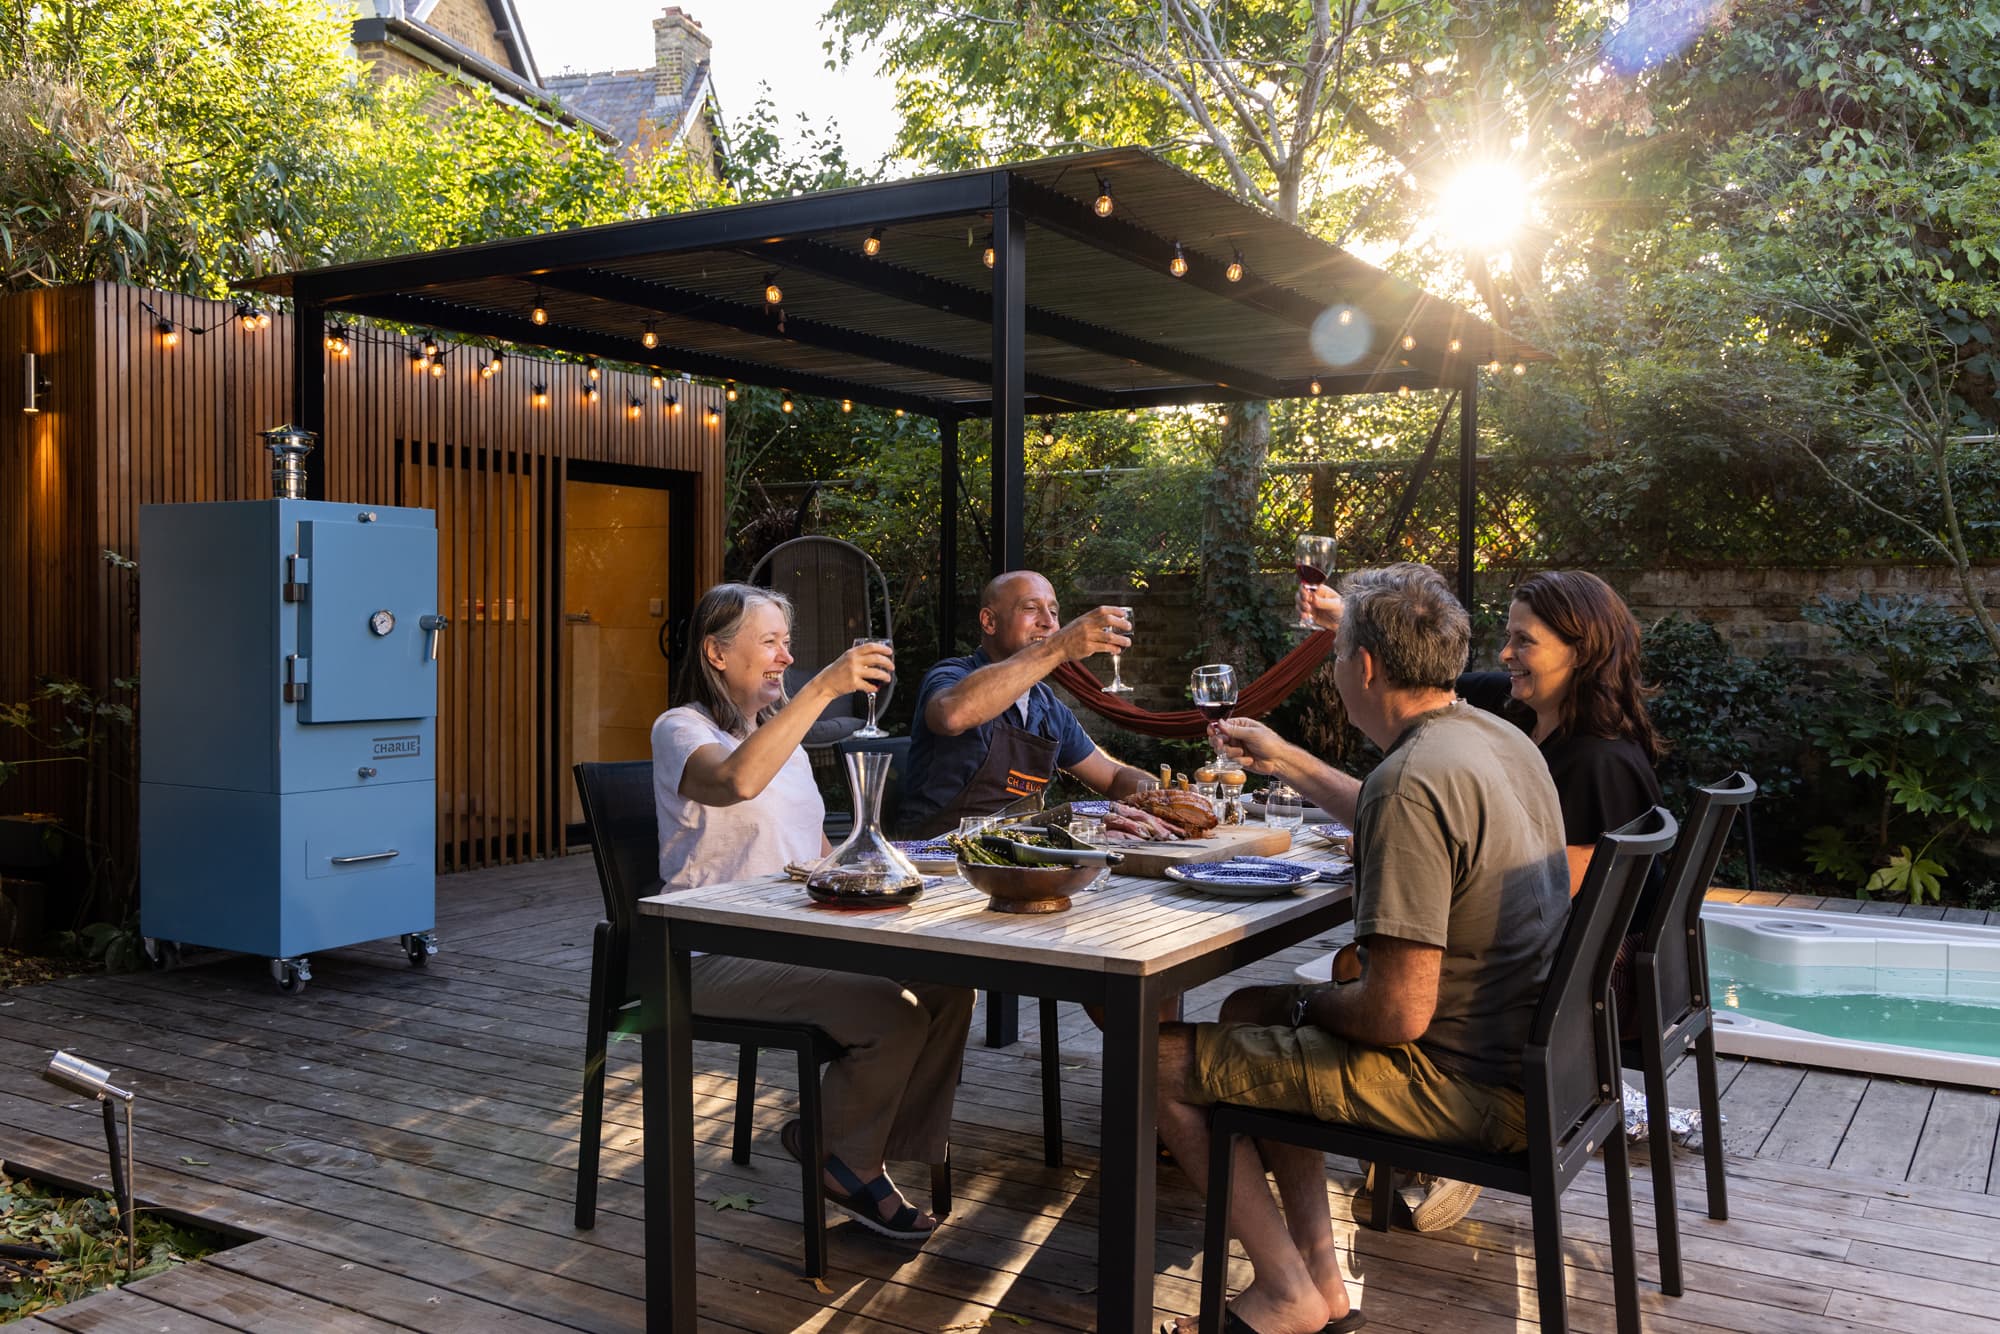 Charlie Charcoal Oven in Blue Marlin - the perfect way to cook a whole meal outside to share with friends